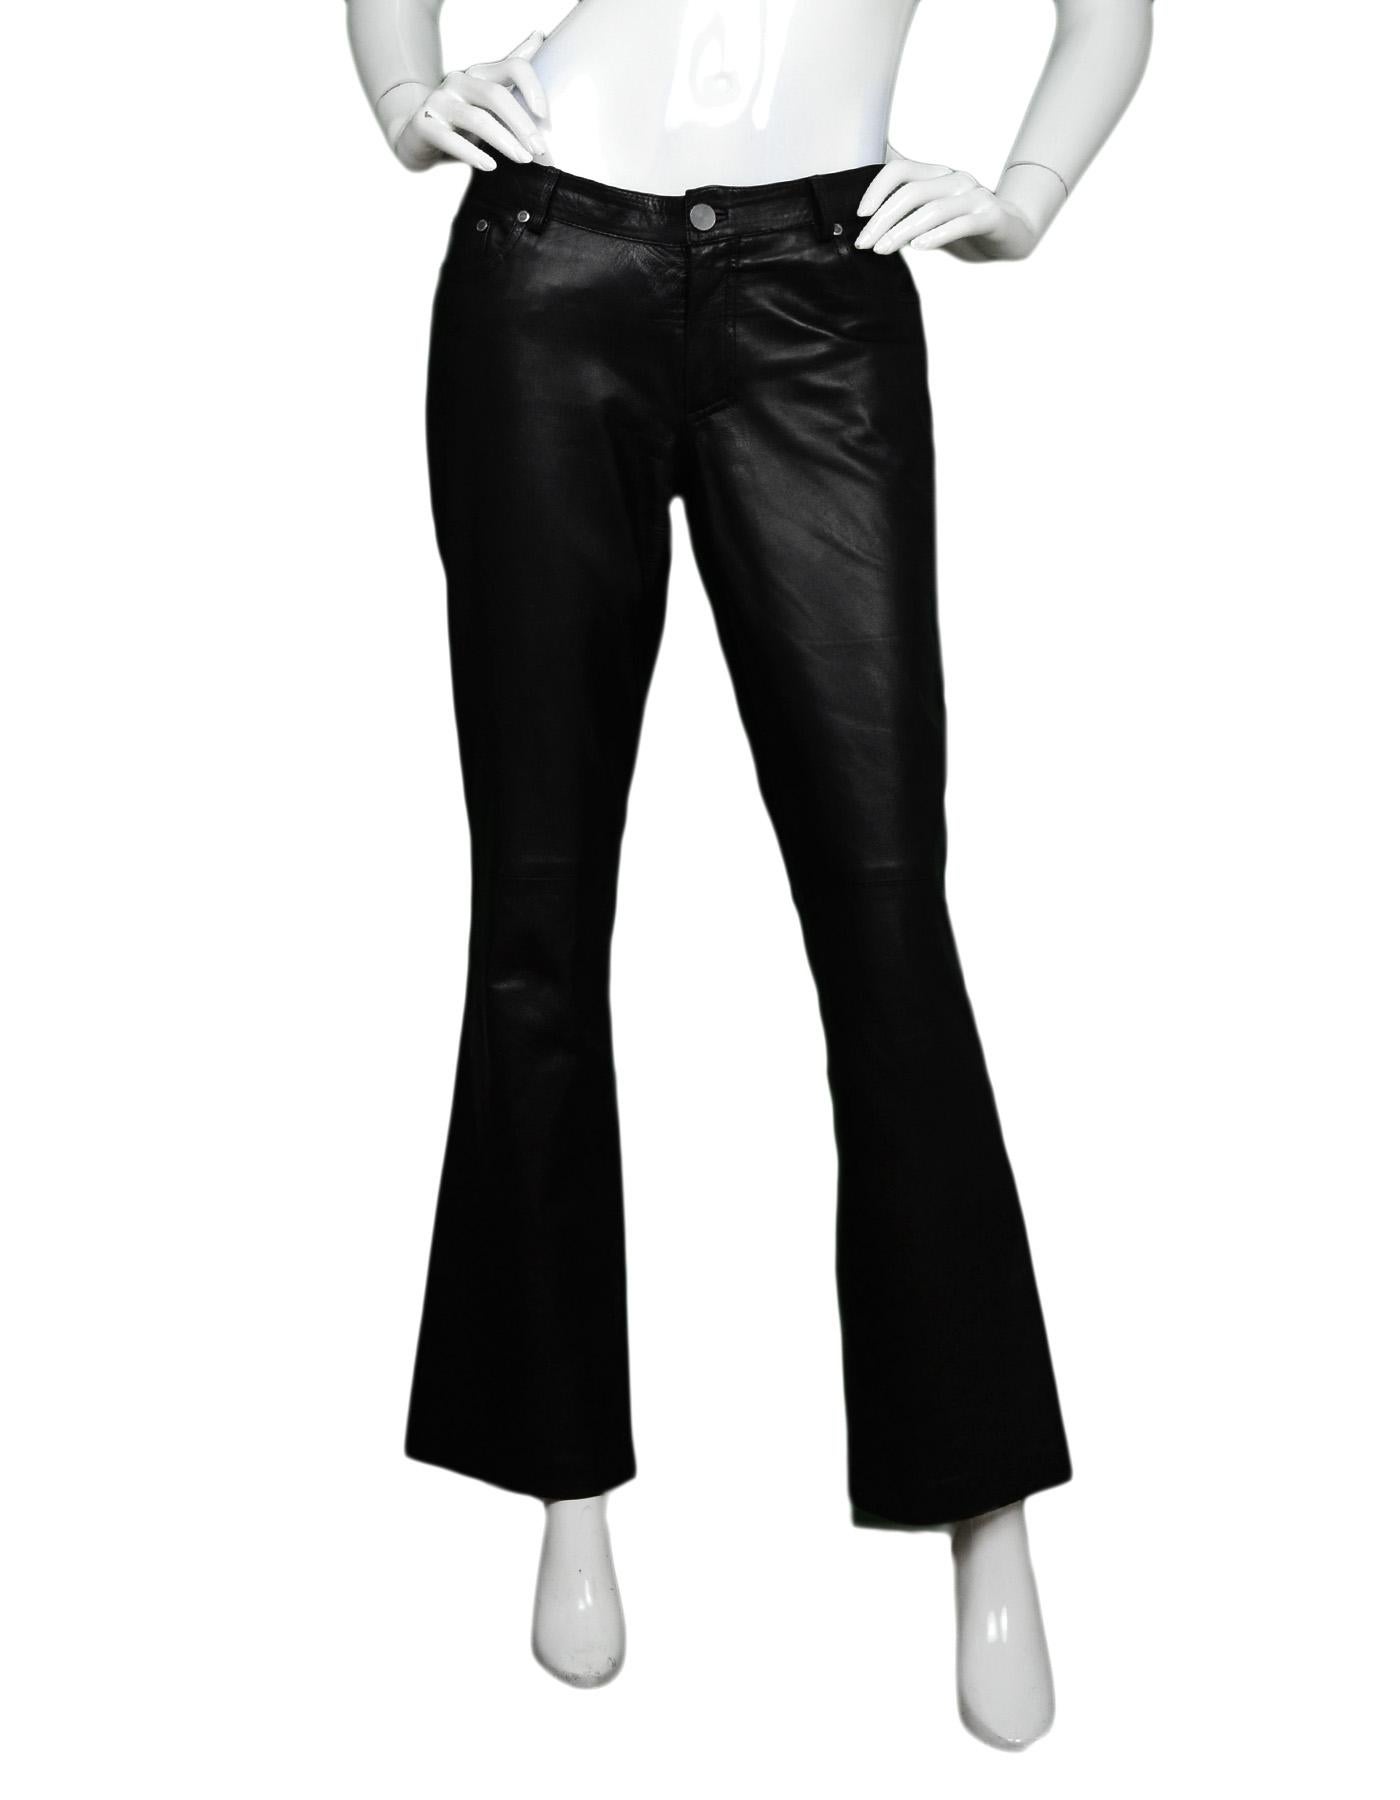 YSL Yves Saint Laurent Black Leather Pants Sz 38

Made In:  Italy
Color: Black
Materials: Genuine leather
Lining:  50% viscose, 50% cupro bemberg
Overall Condition: Excellent pre-owned condition
Measurements: 
Waist: 28